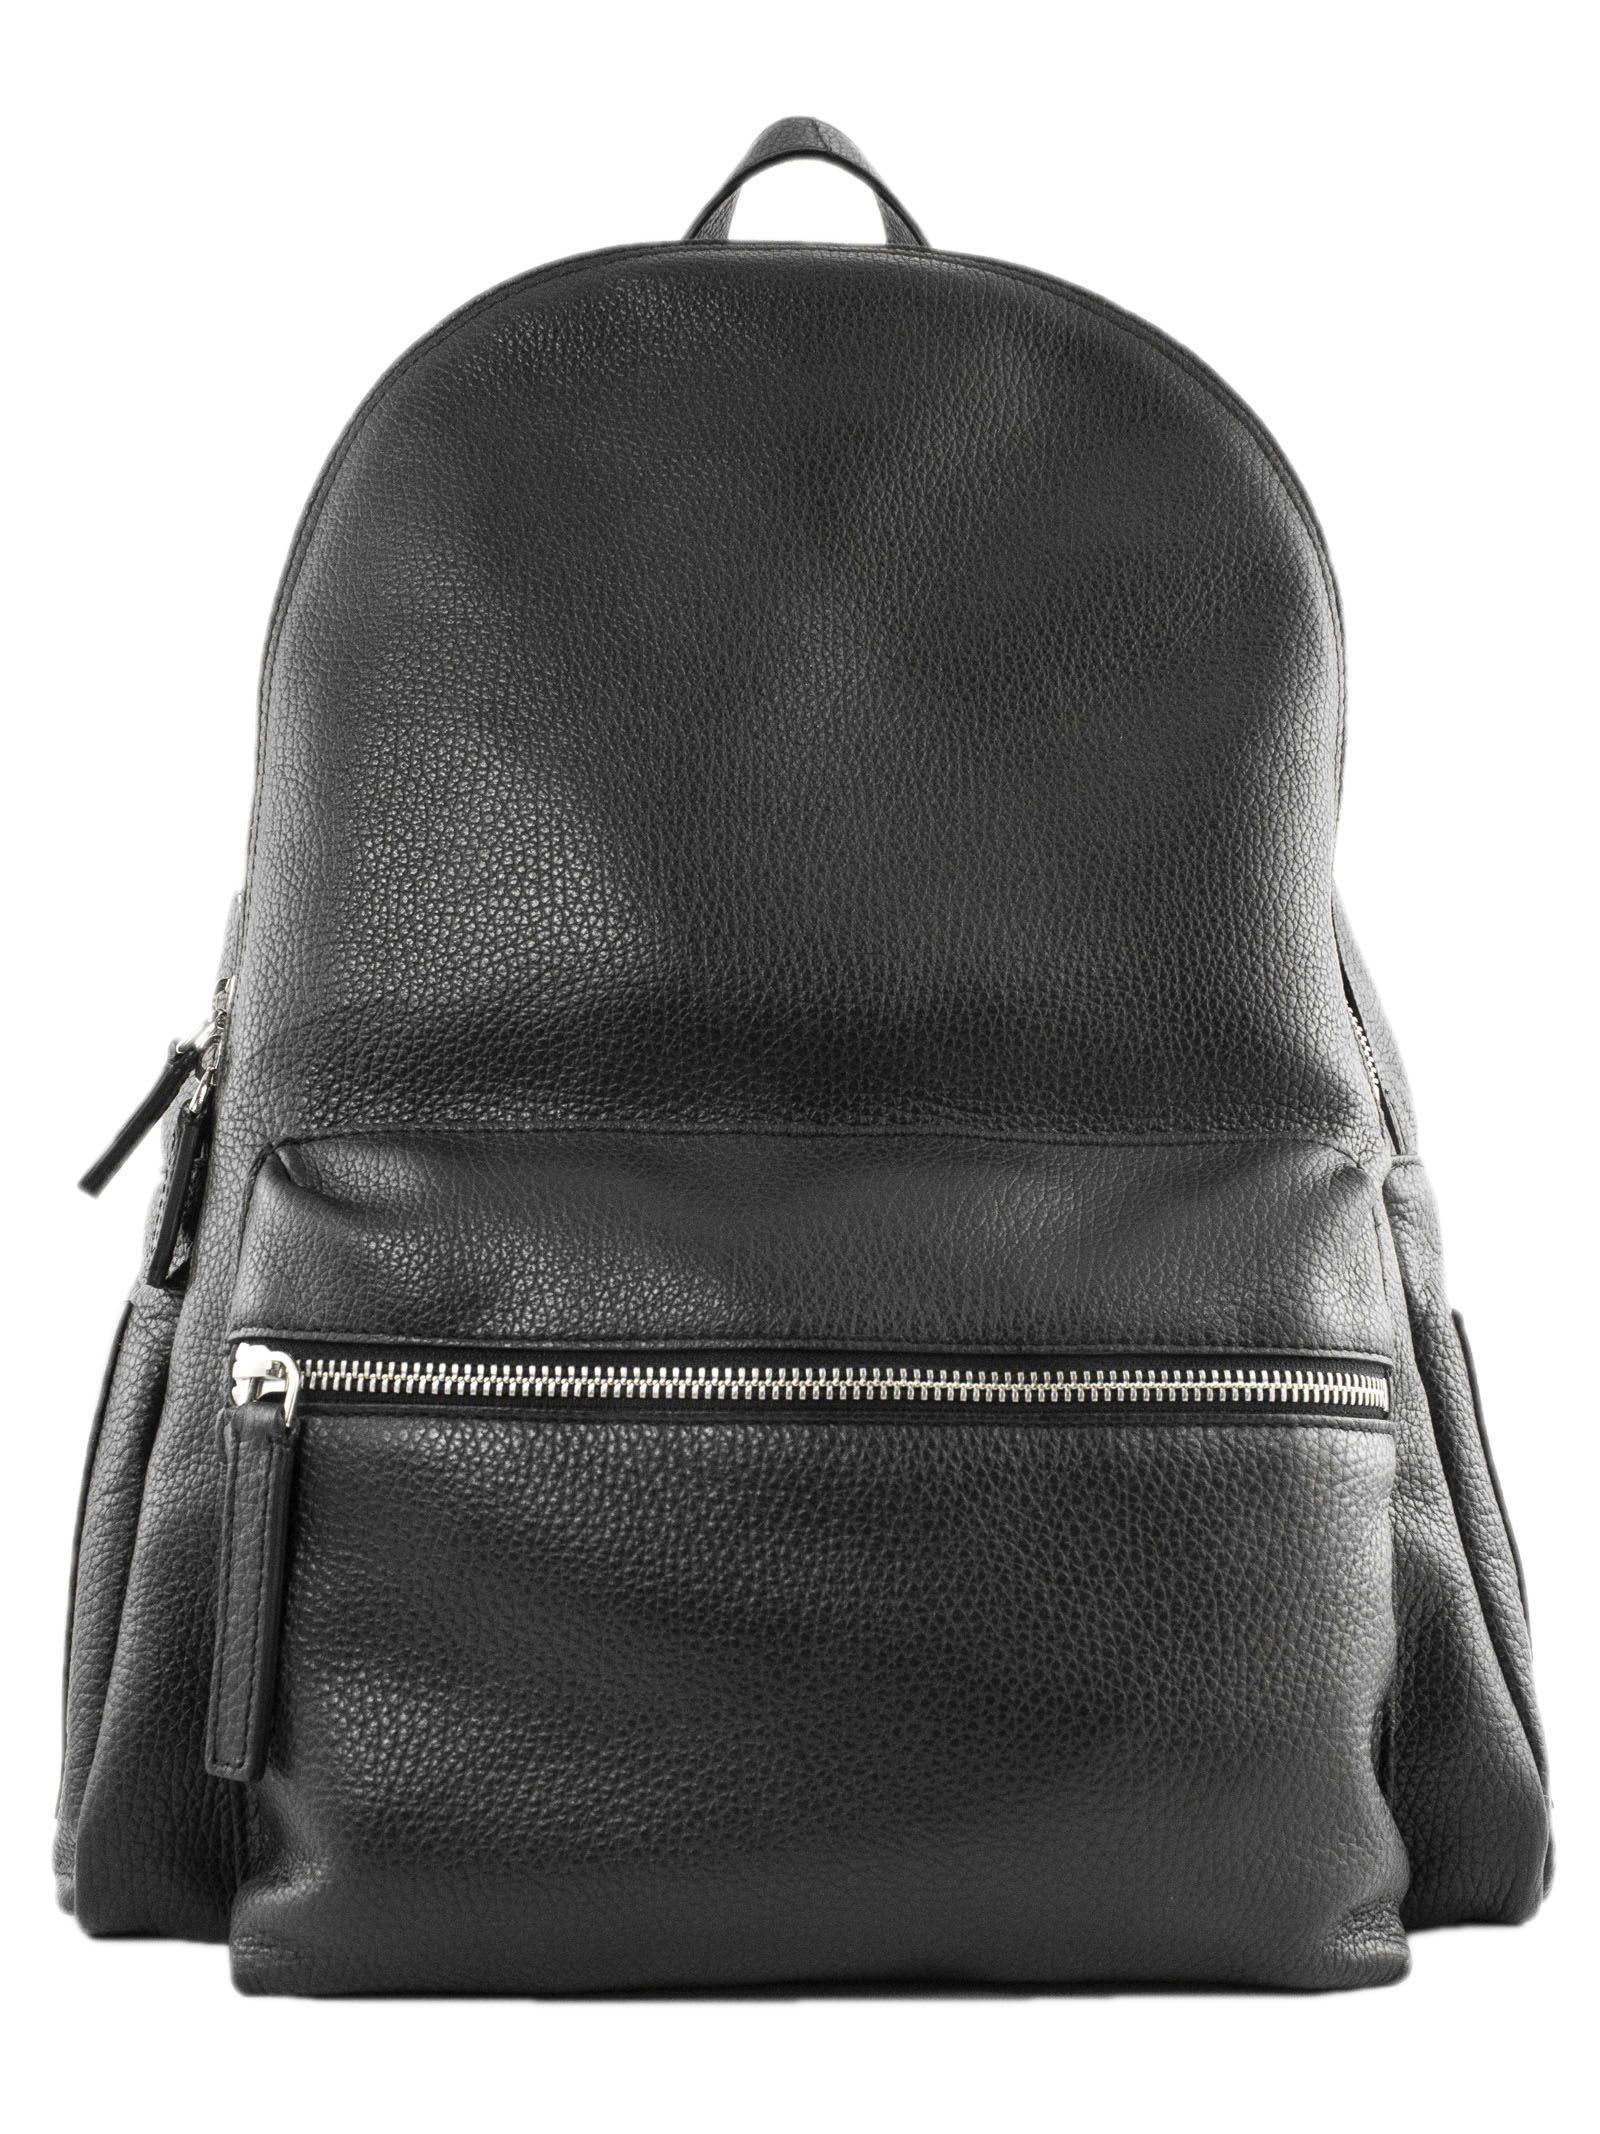 Orciani Micron Deep Backpack In Black Grained Leather